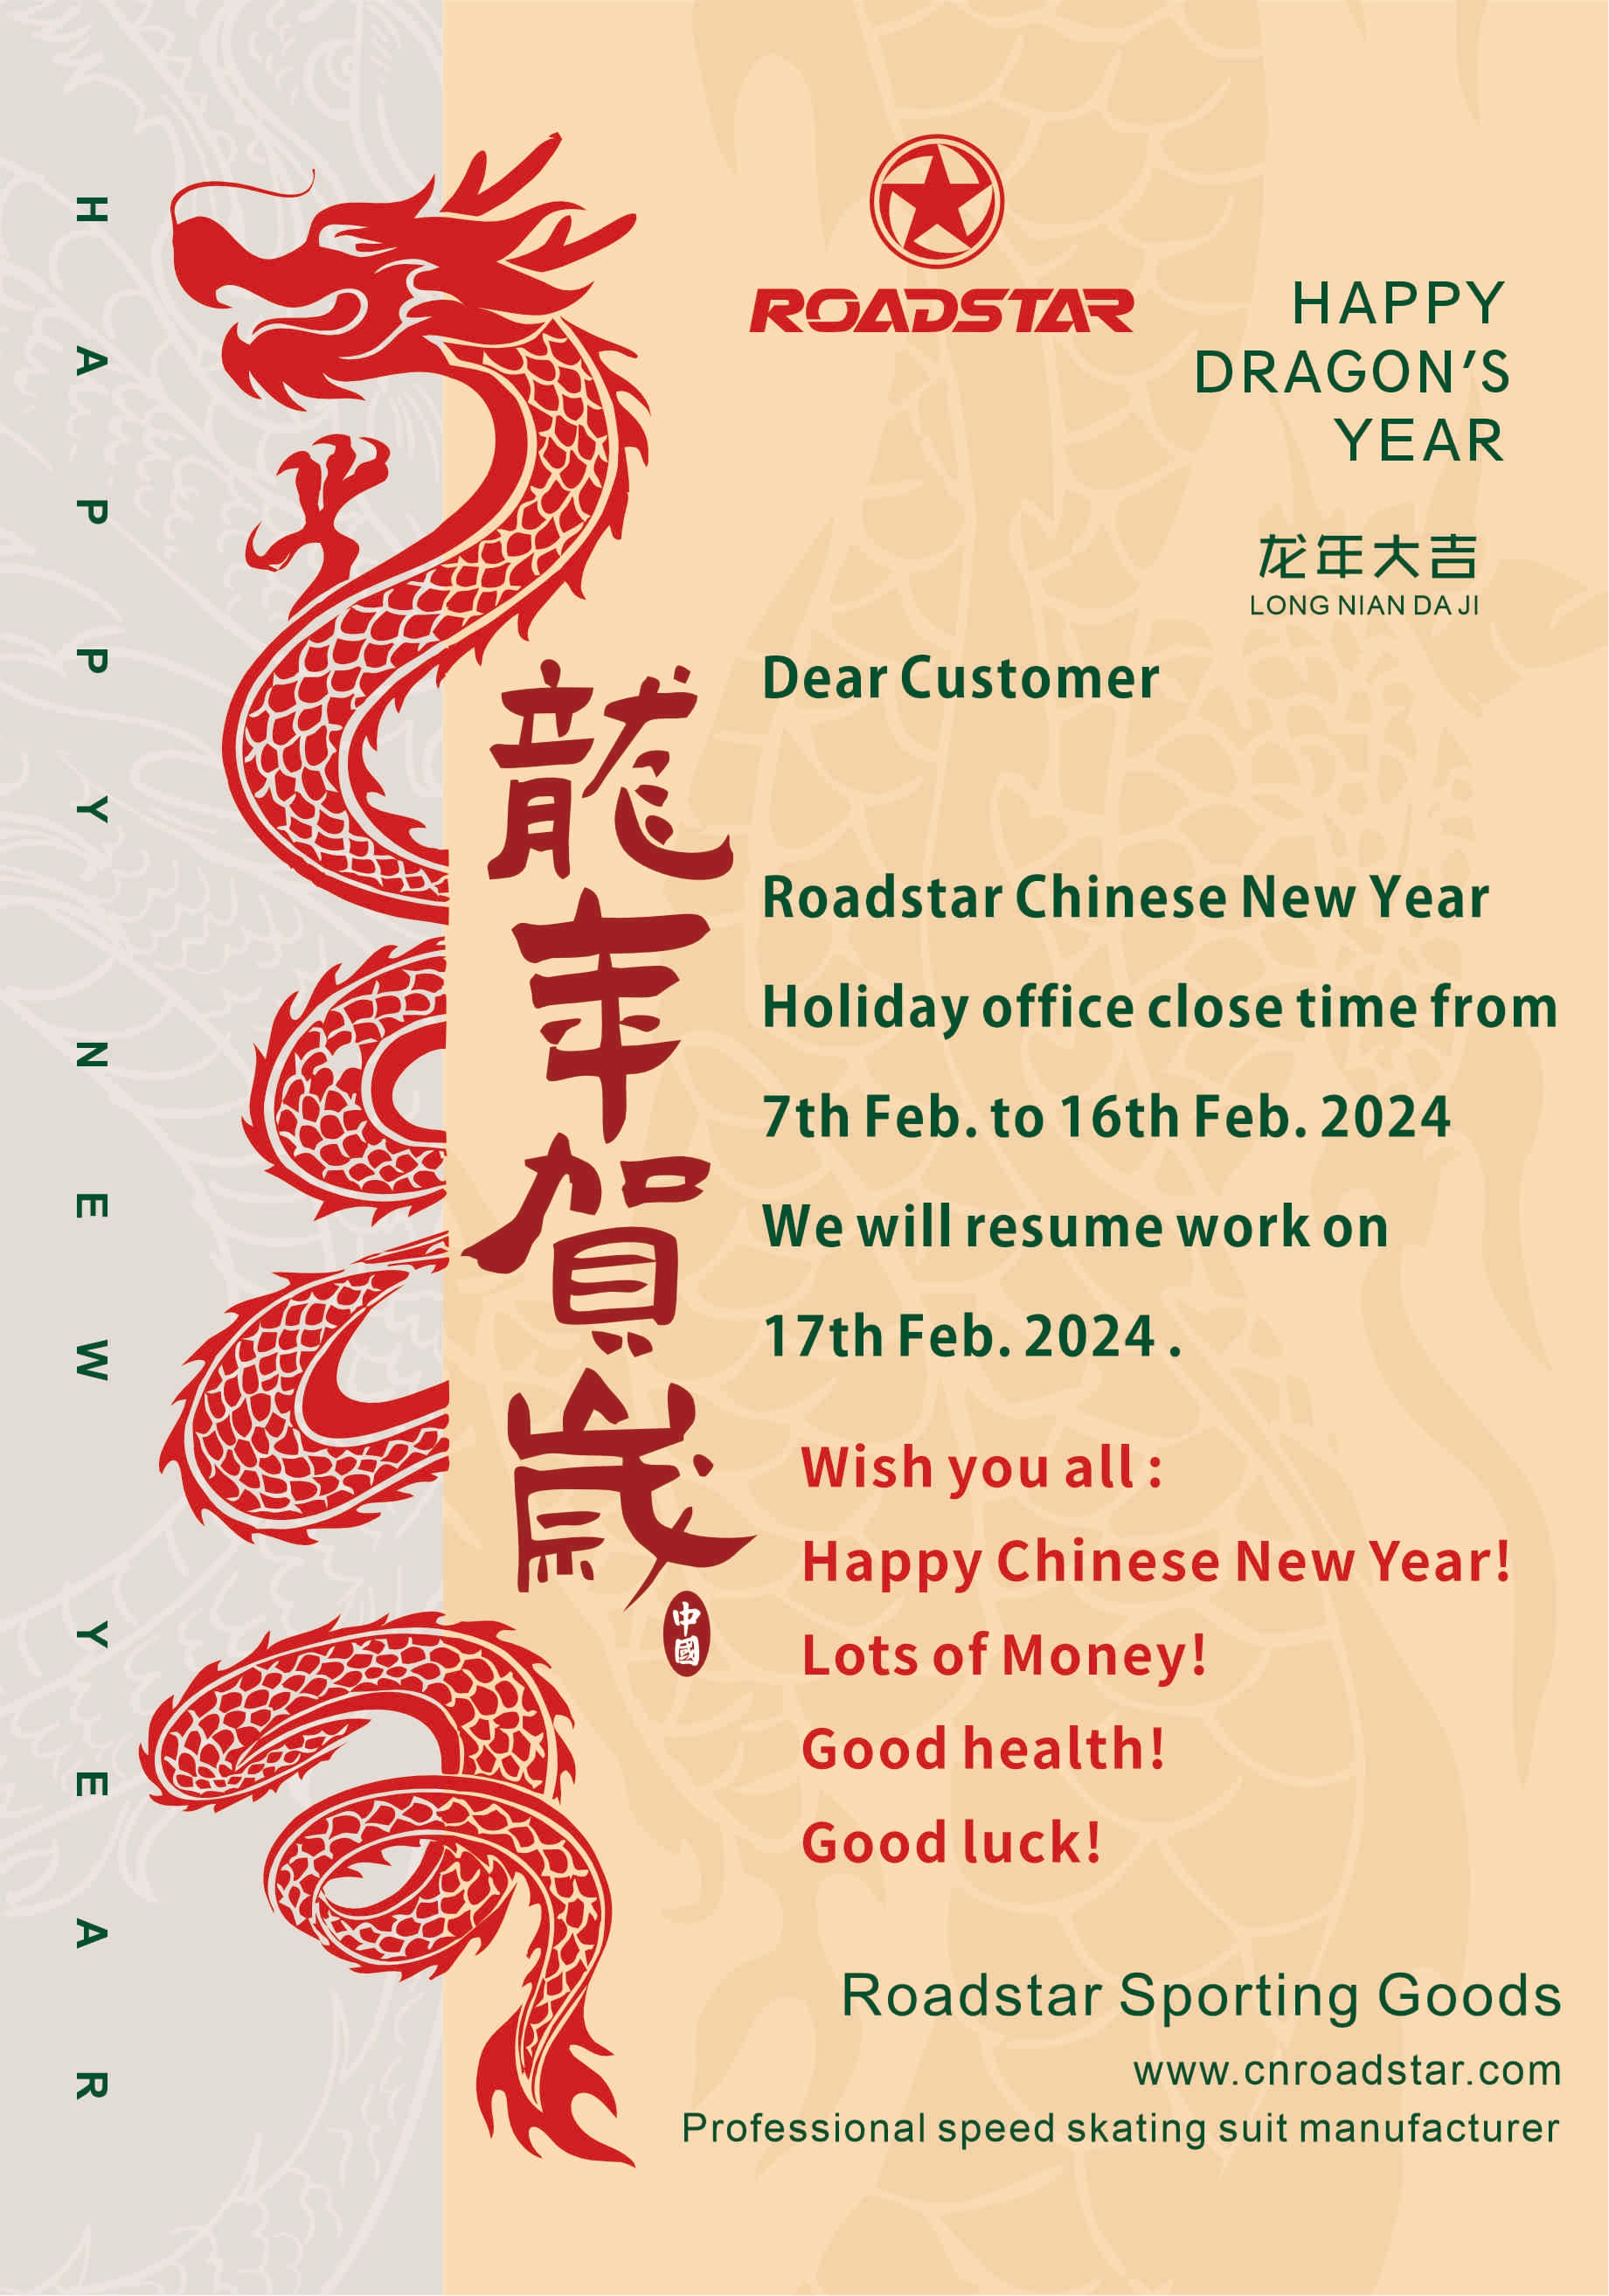 Roadstar Chinese New Year Holiday 